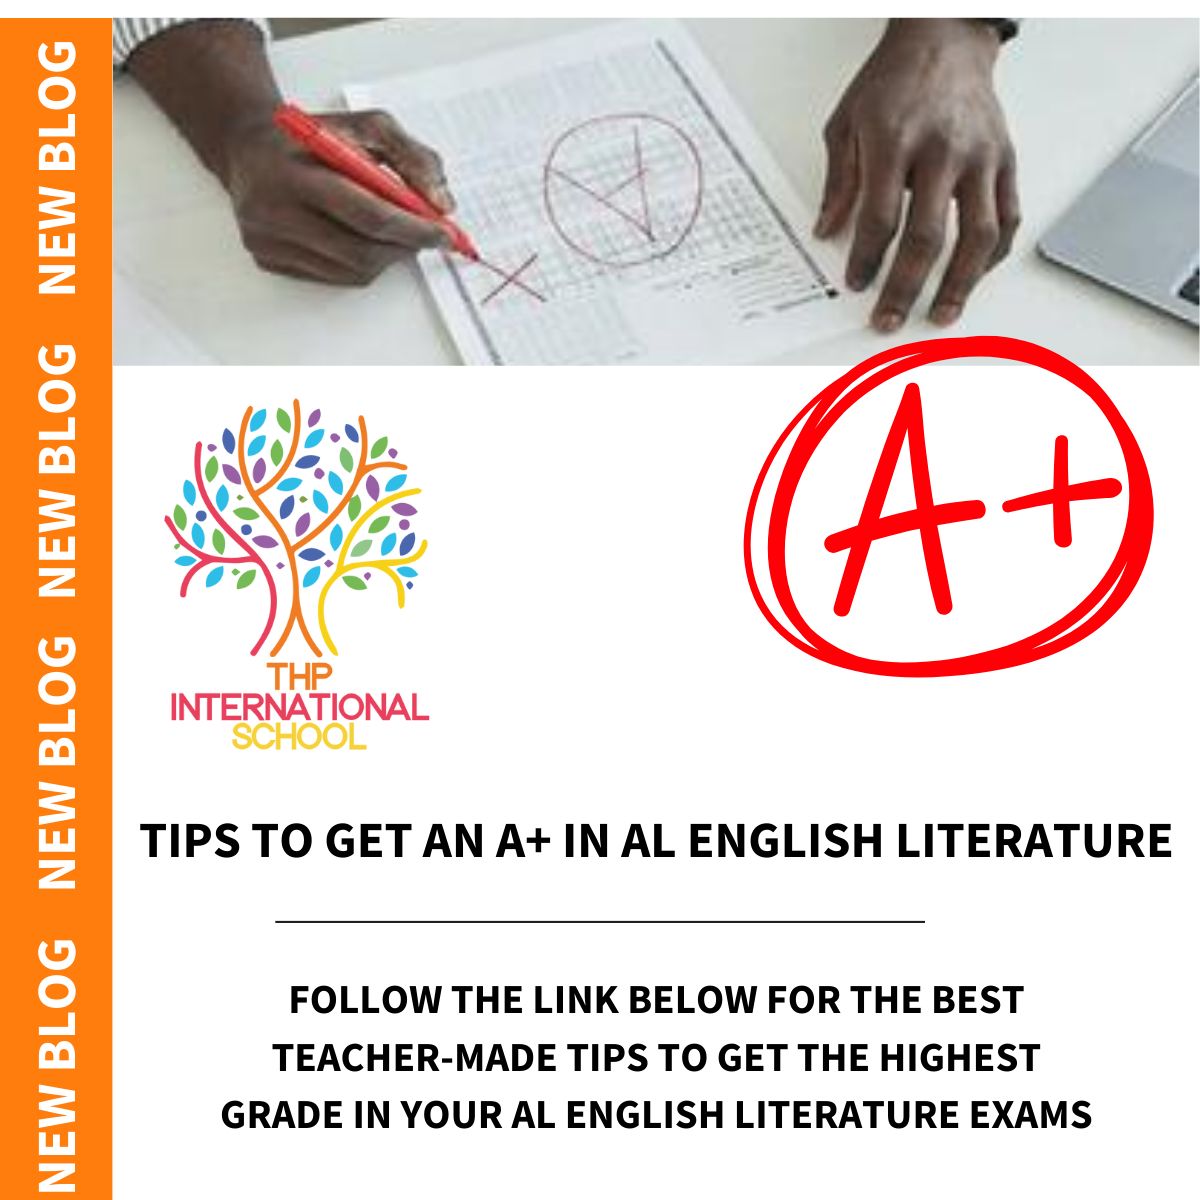 How to get an A* in A-Level English Literature?